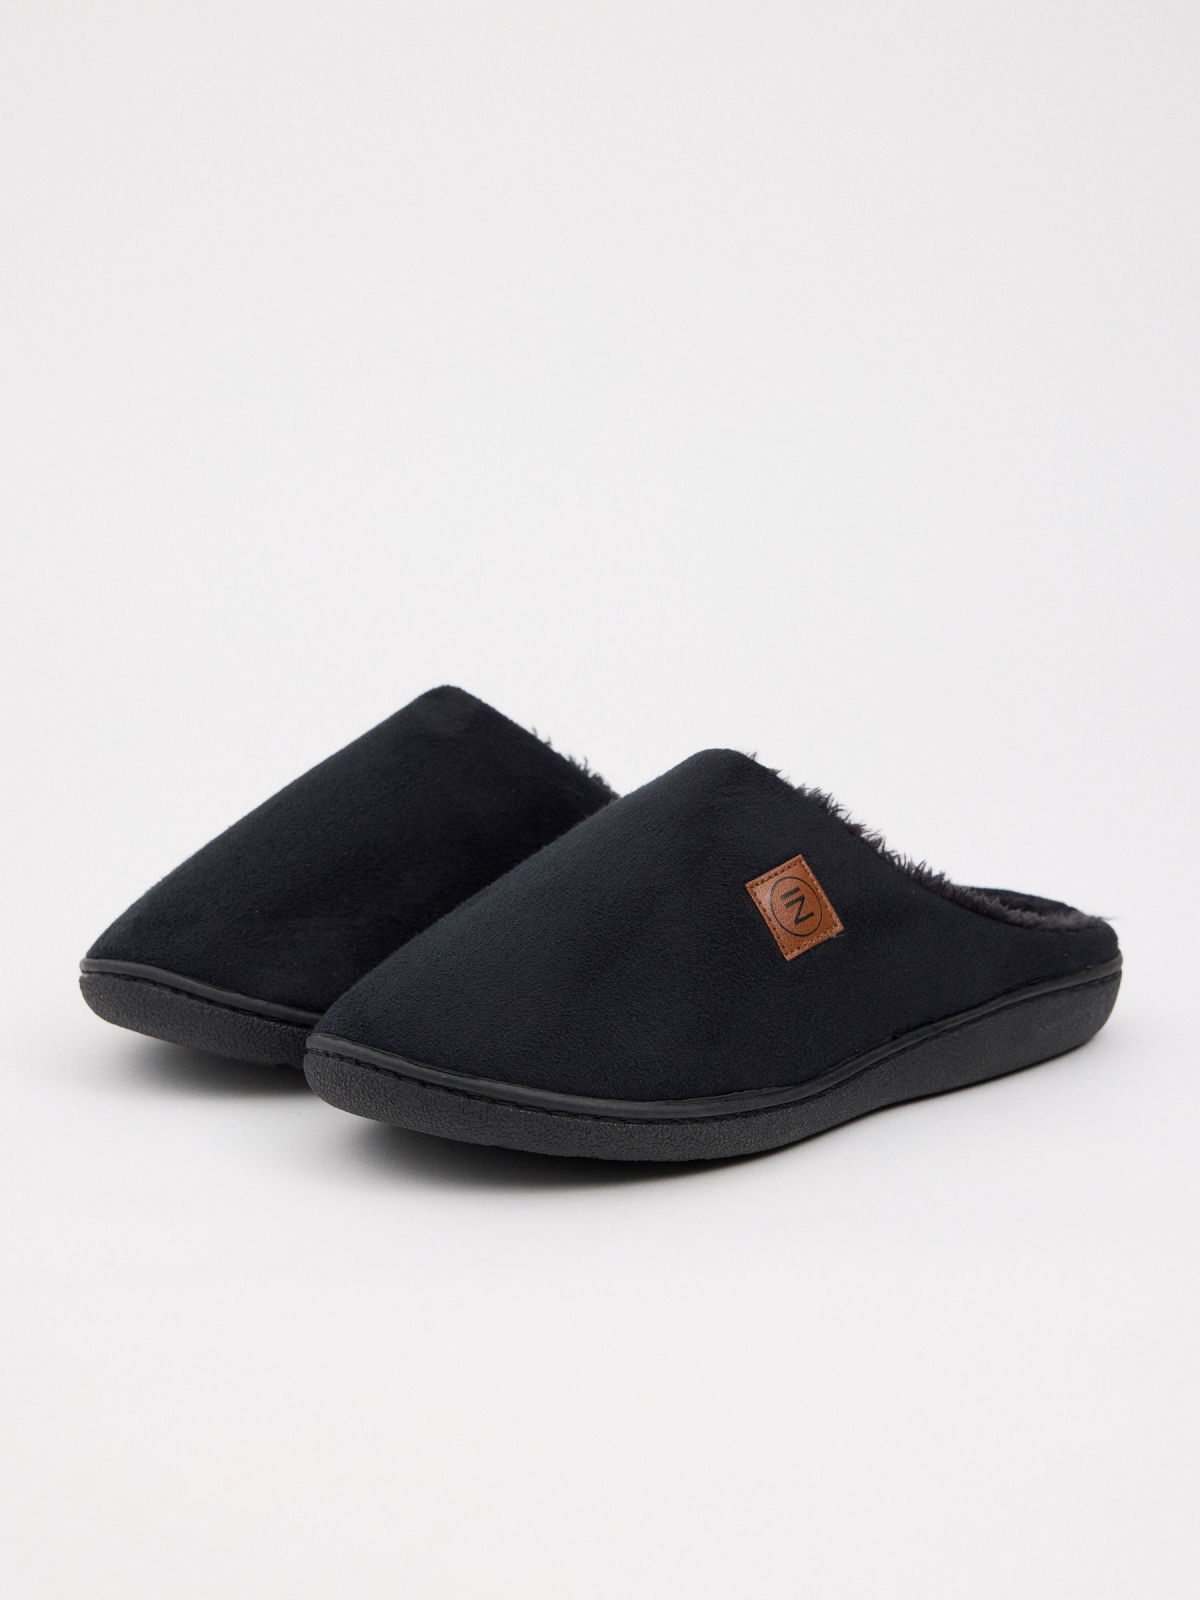 Black home slippers black middle back view